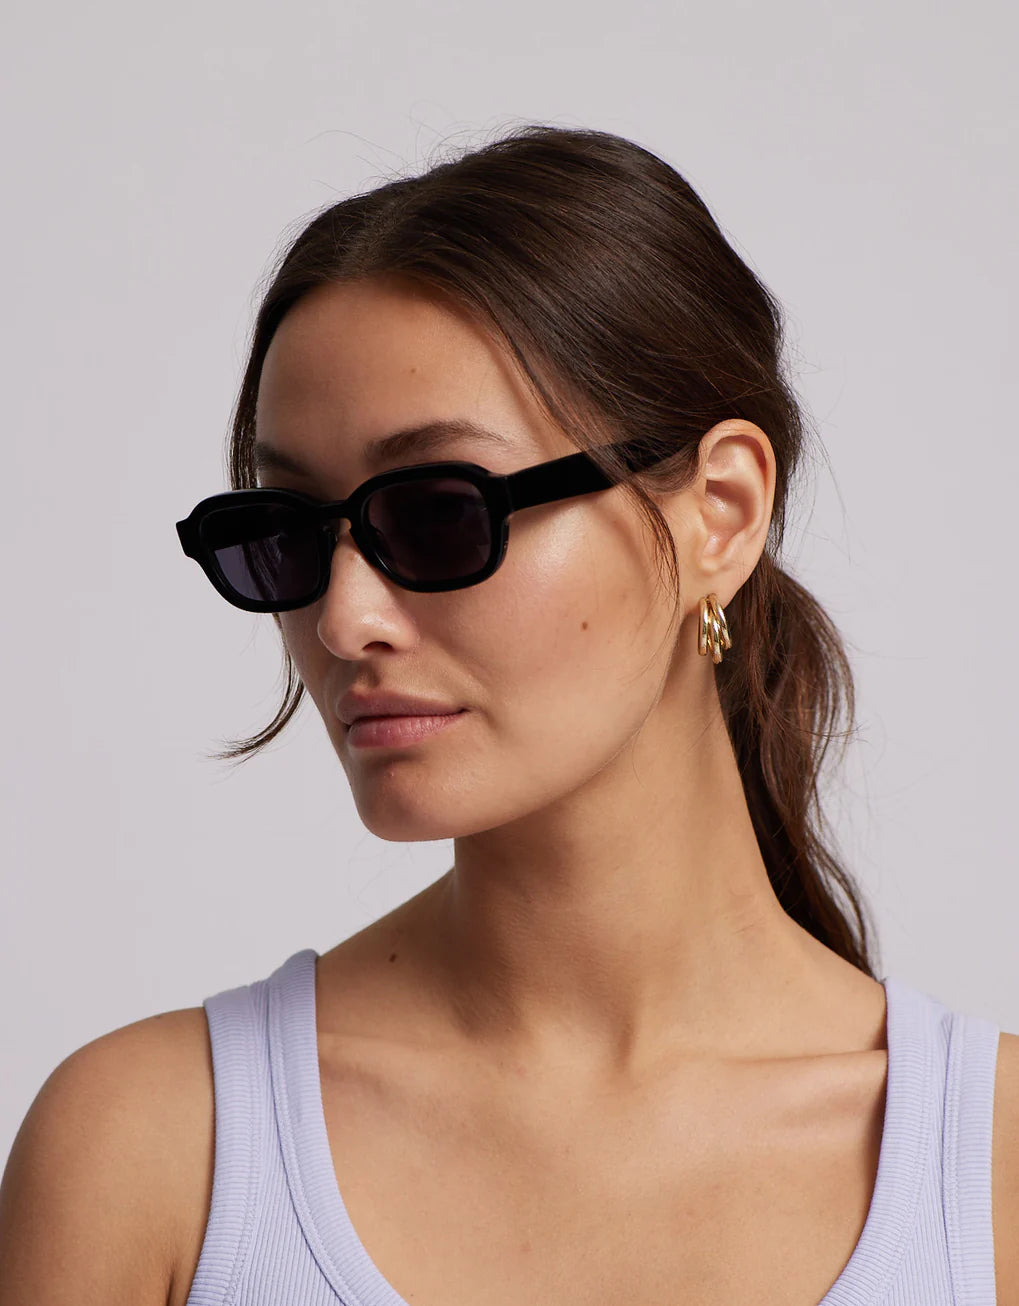 The Colorful Standard Sunglass 01 - Deep Black model is sporting a chic black pair of sunglasses, providing UV400 protection for your eyes during any adventure. Completing the look, they are also wearing a stylish purple tank top.